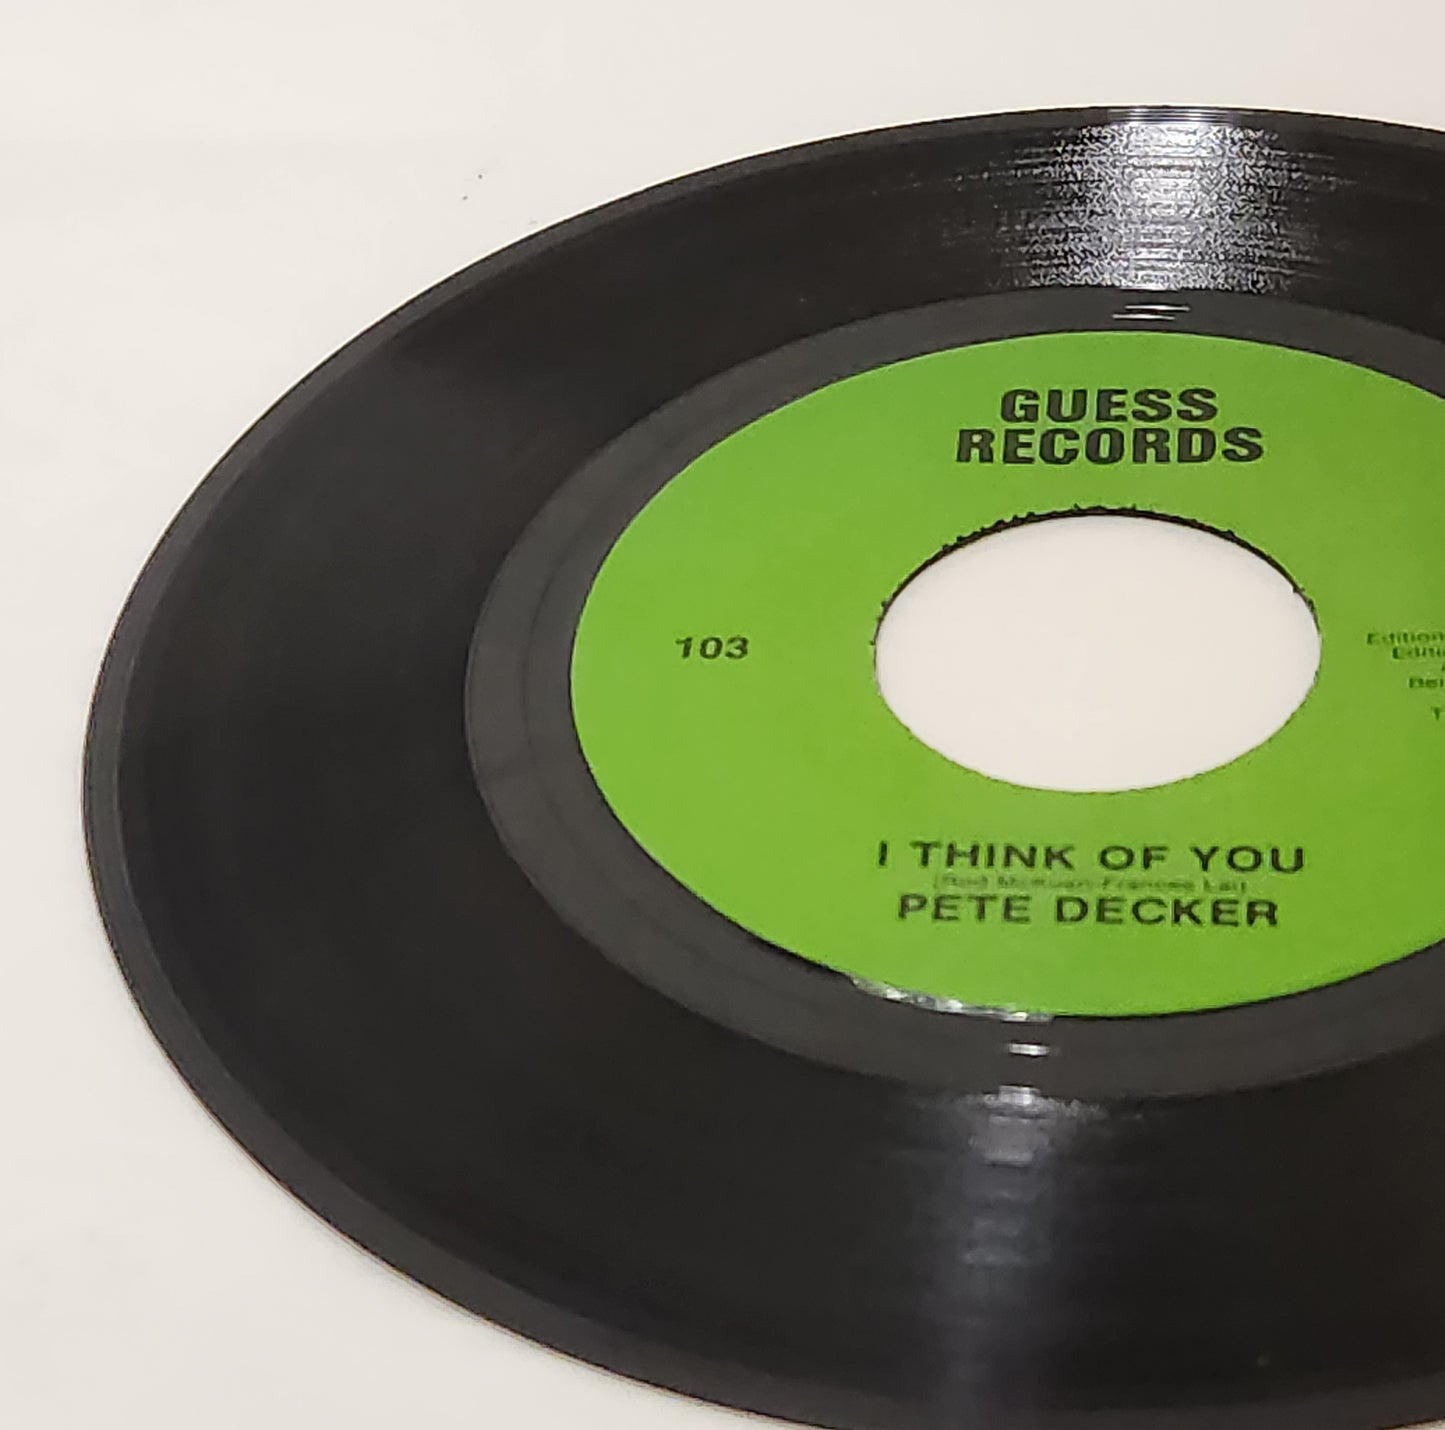 Pete Decker "Didn't We Girl / I Think Of You" Norfolk VA Funk & Soul 7" Single (Guess Records)